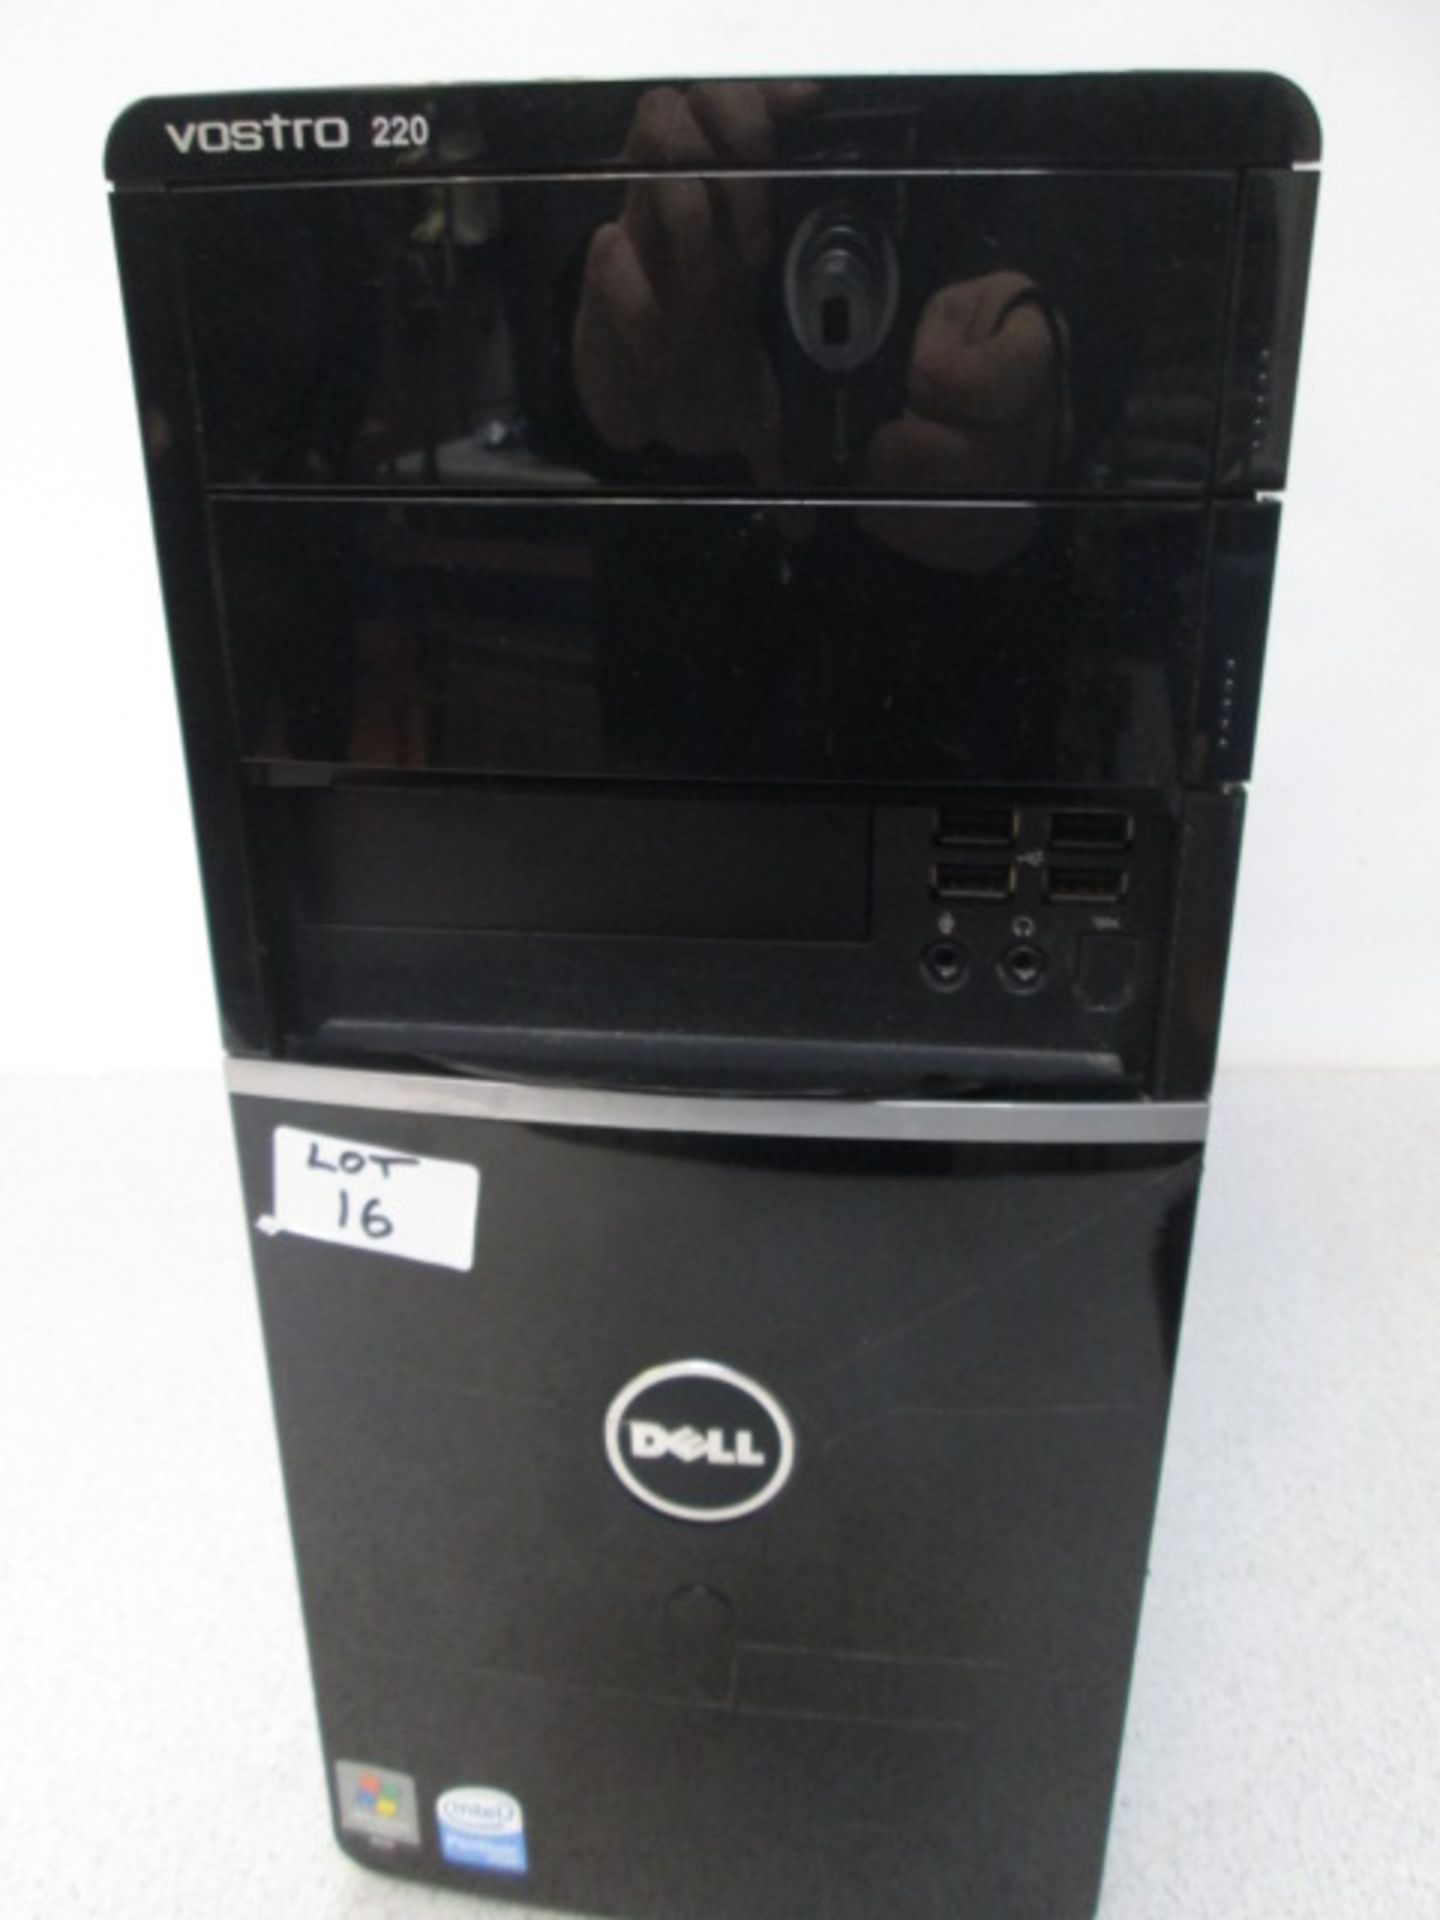 Dell Vostro 220 Tower PC - Image 2 of 2